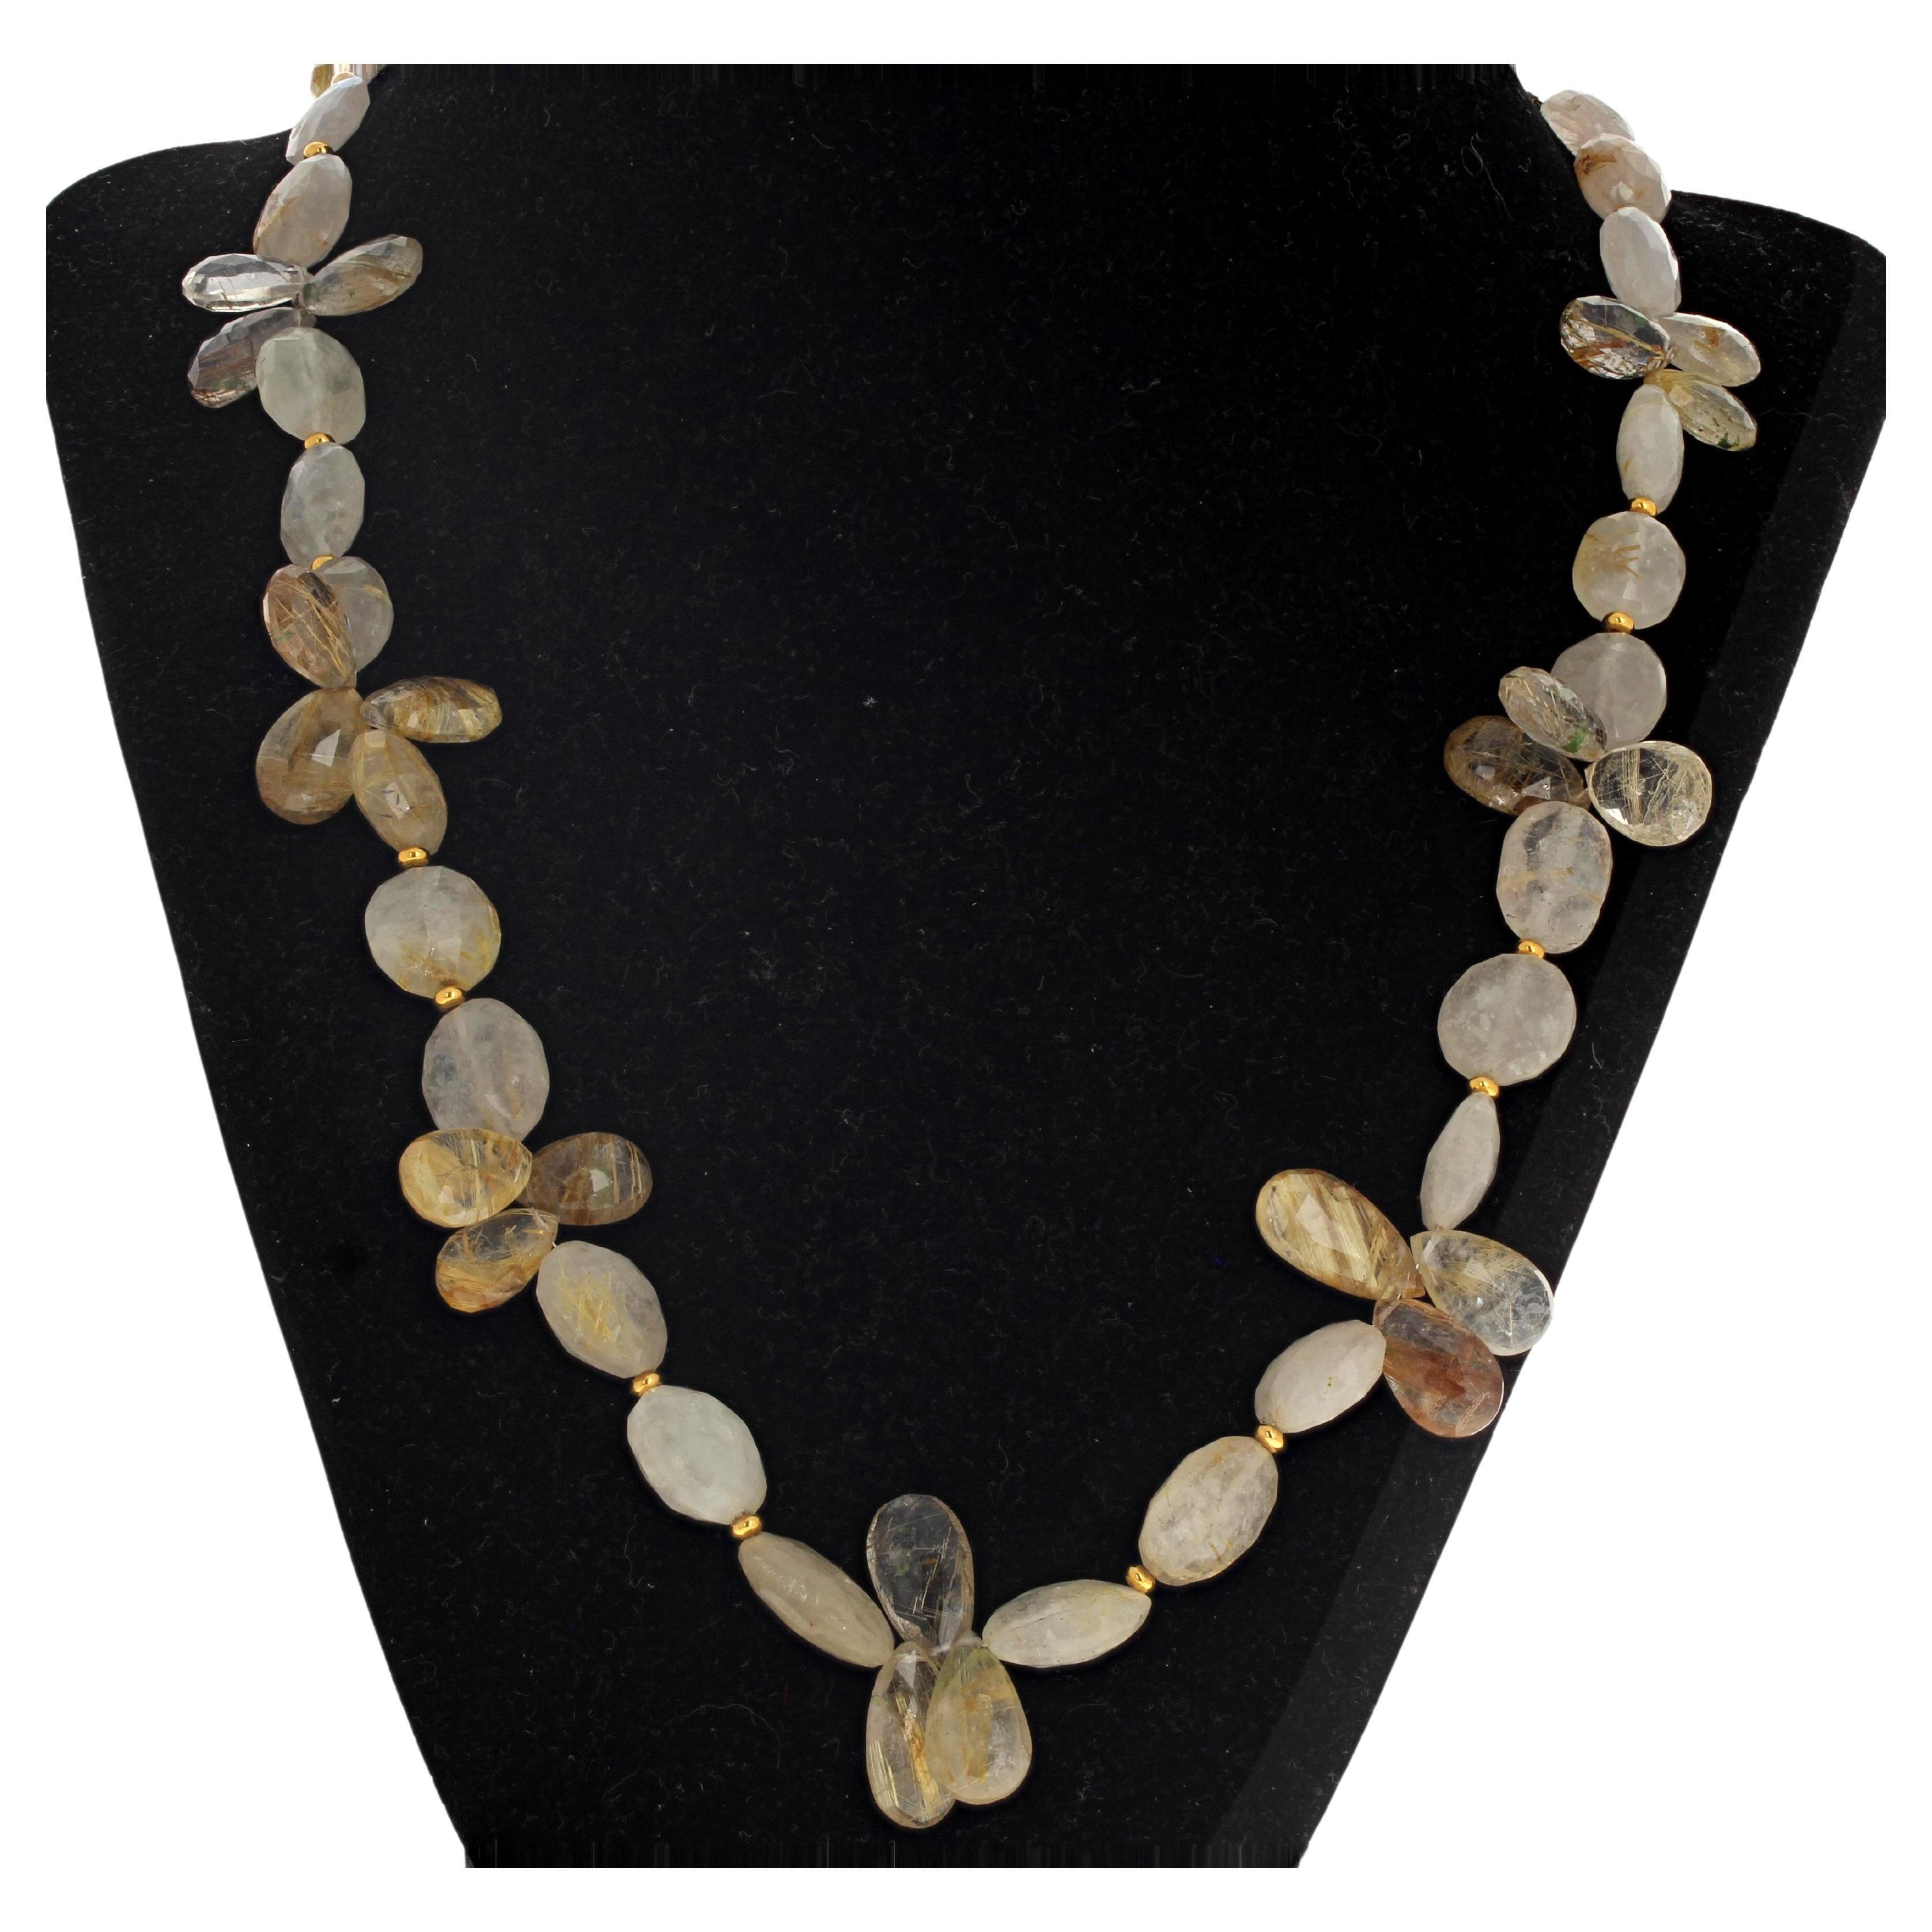 This lovely 21 inch long necklace of natural goldy Rutilated Quartz is enhanced with little gold plated sparkling beads.  These natural Quartz are approximately 13mm x 12mm.  The clasp is a gold plated easy to use hook clasp.